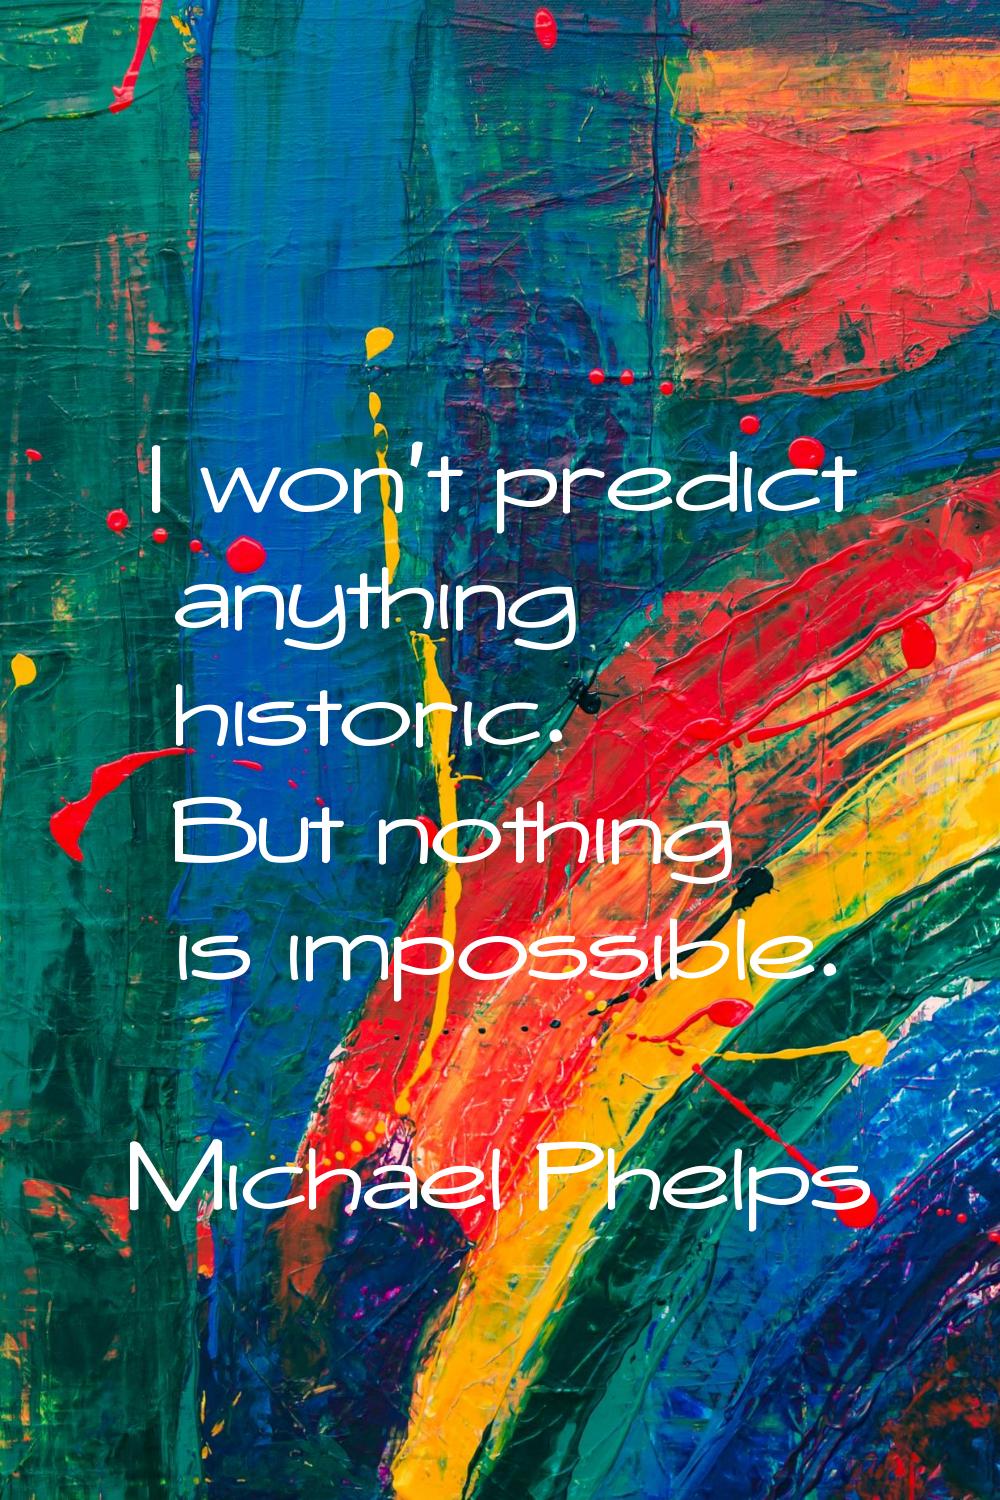 I won't predict anything historic. But nothing is impossible.